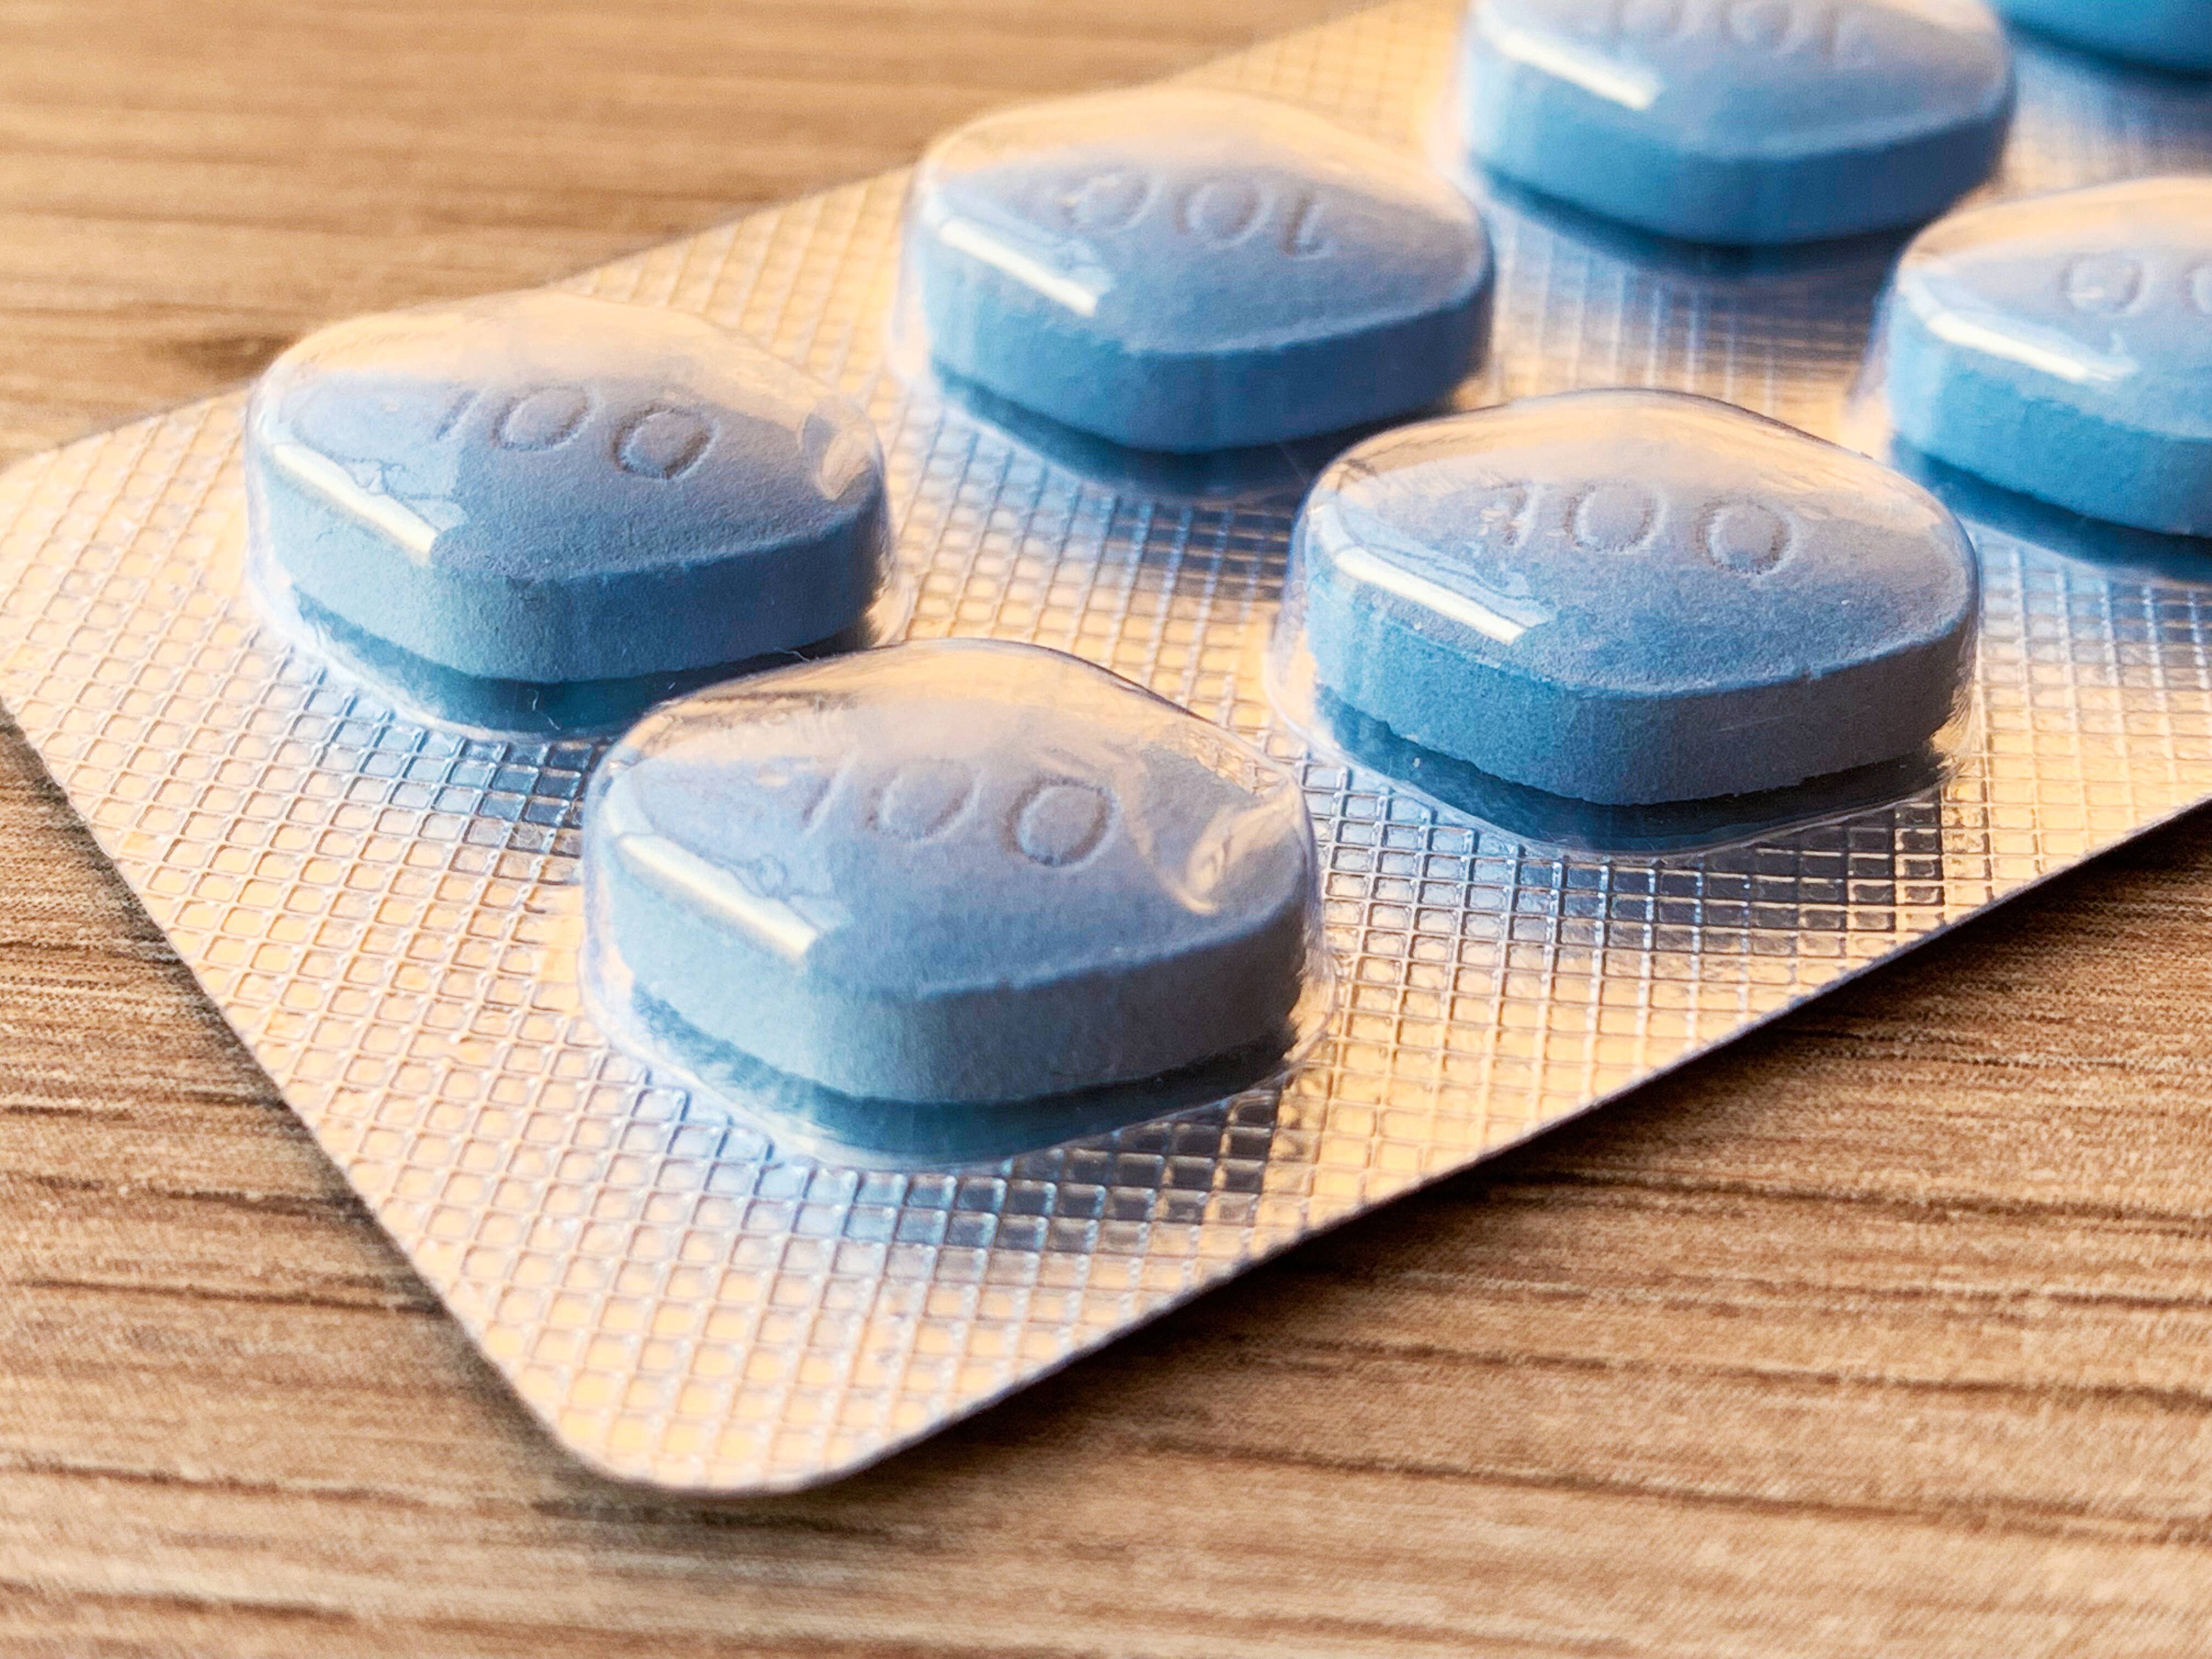 Scientists Are Stopping Malaria With Viagra, Smart News